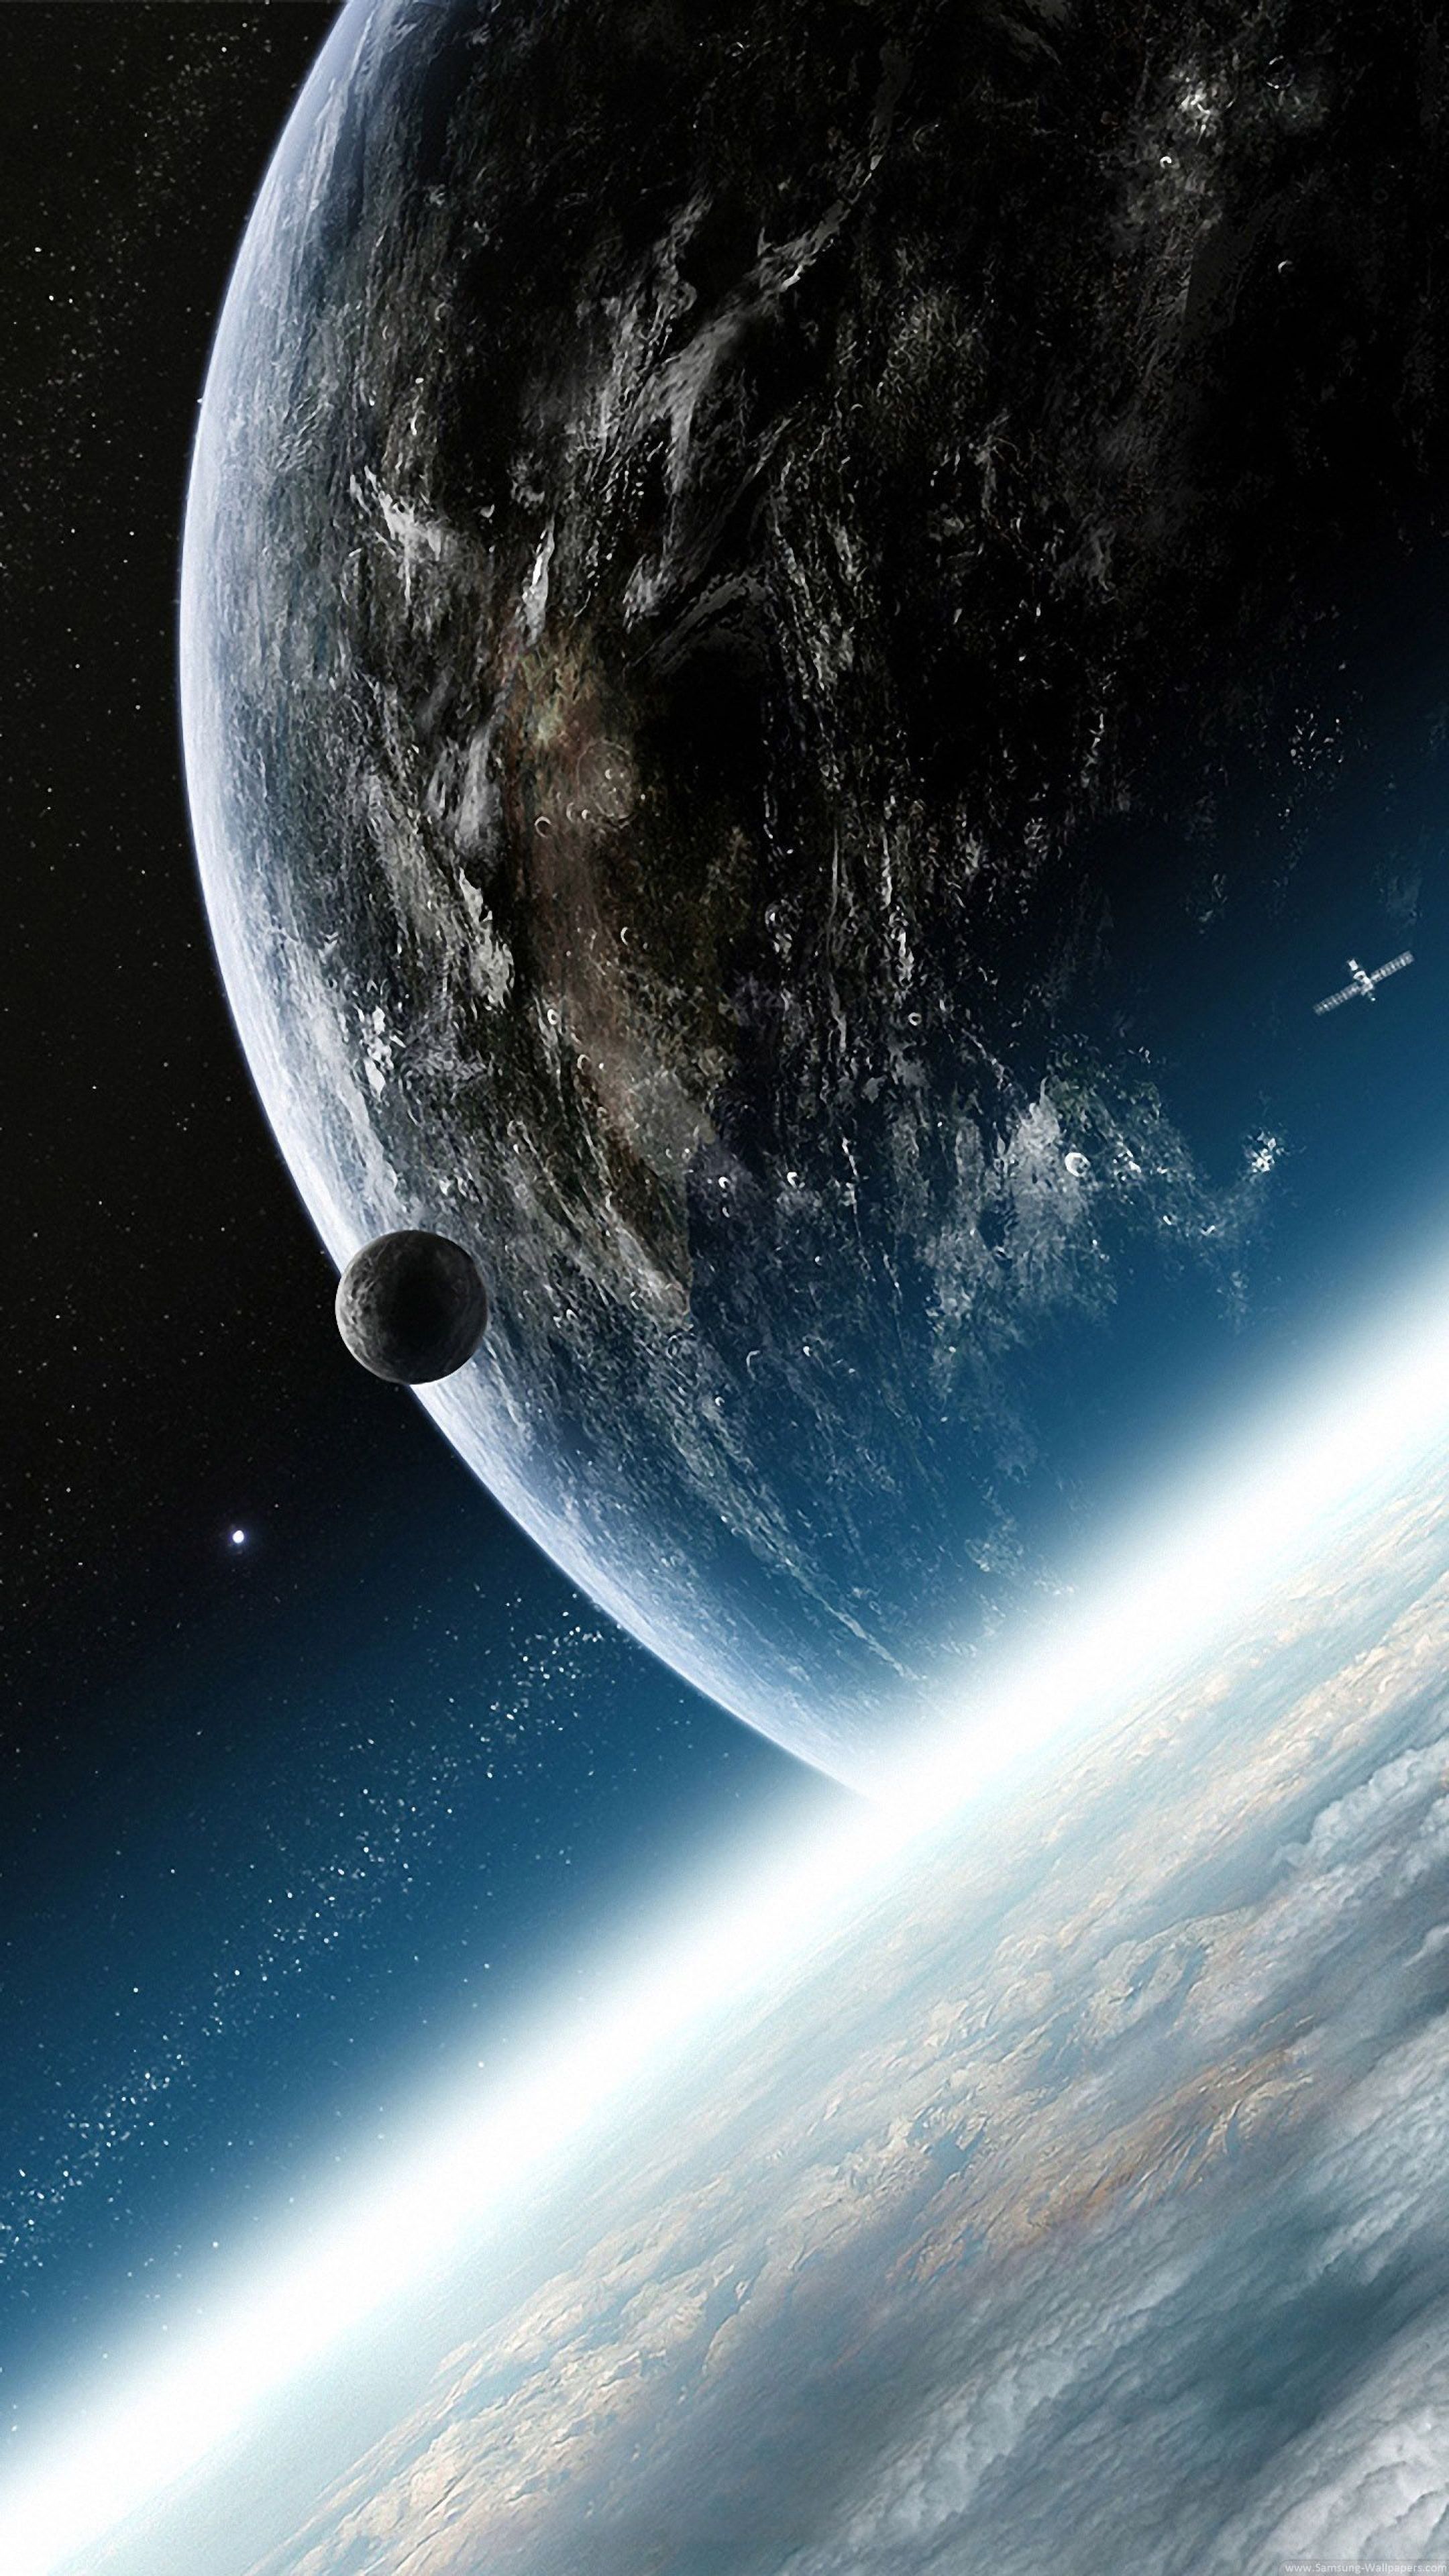 Ultra HD 4K Image for Mobile earth from space mobile phone wallpaper. Wallpaper space, Space iphone wallpaper, Planets wallpaper